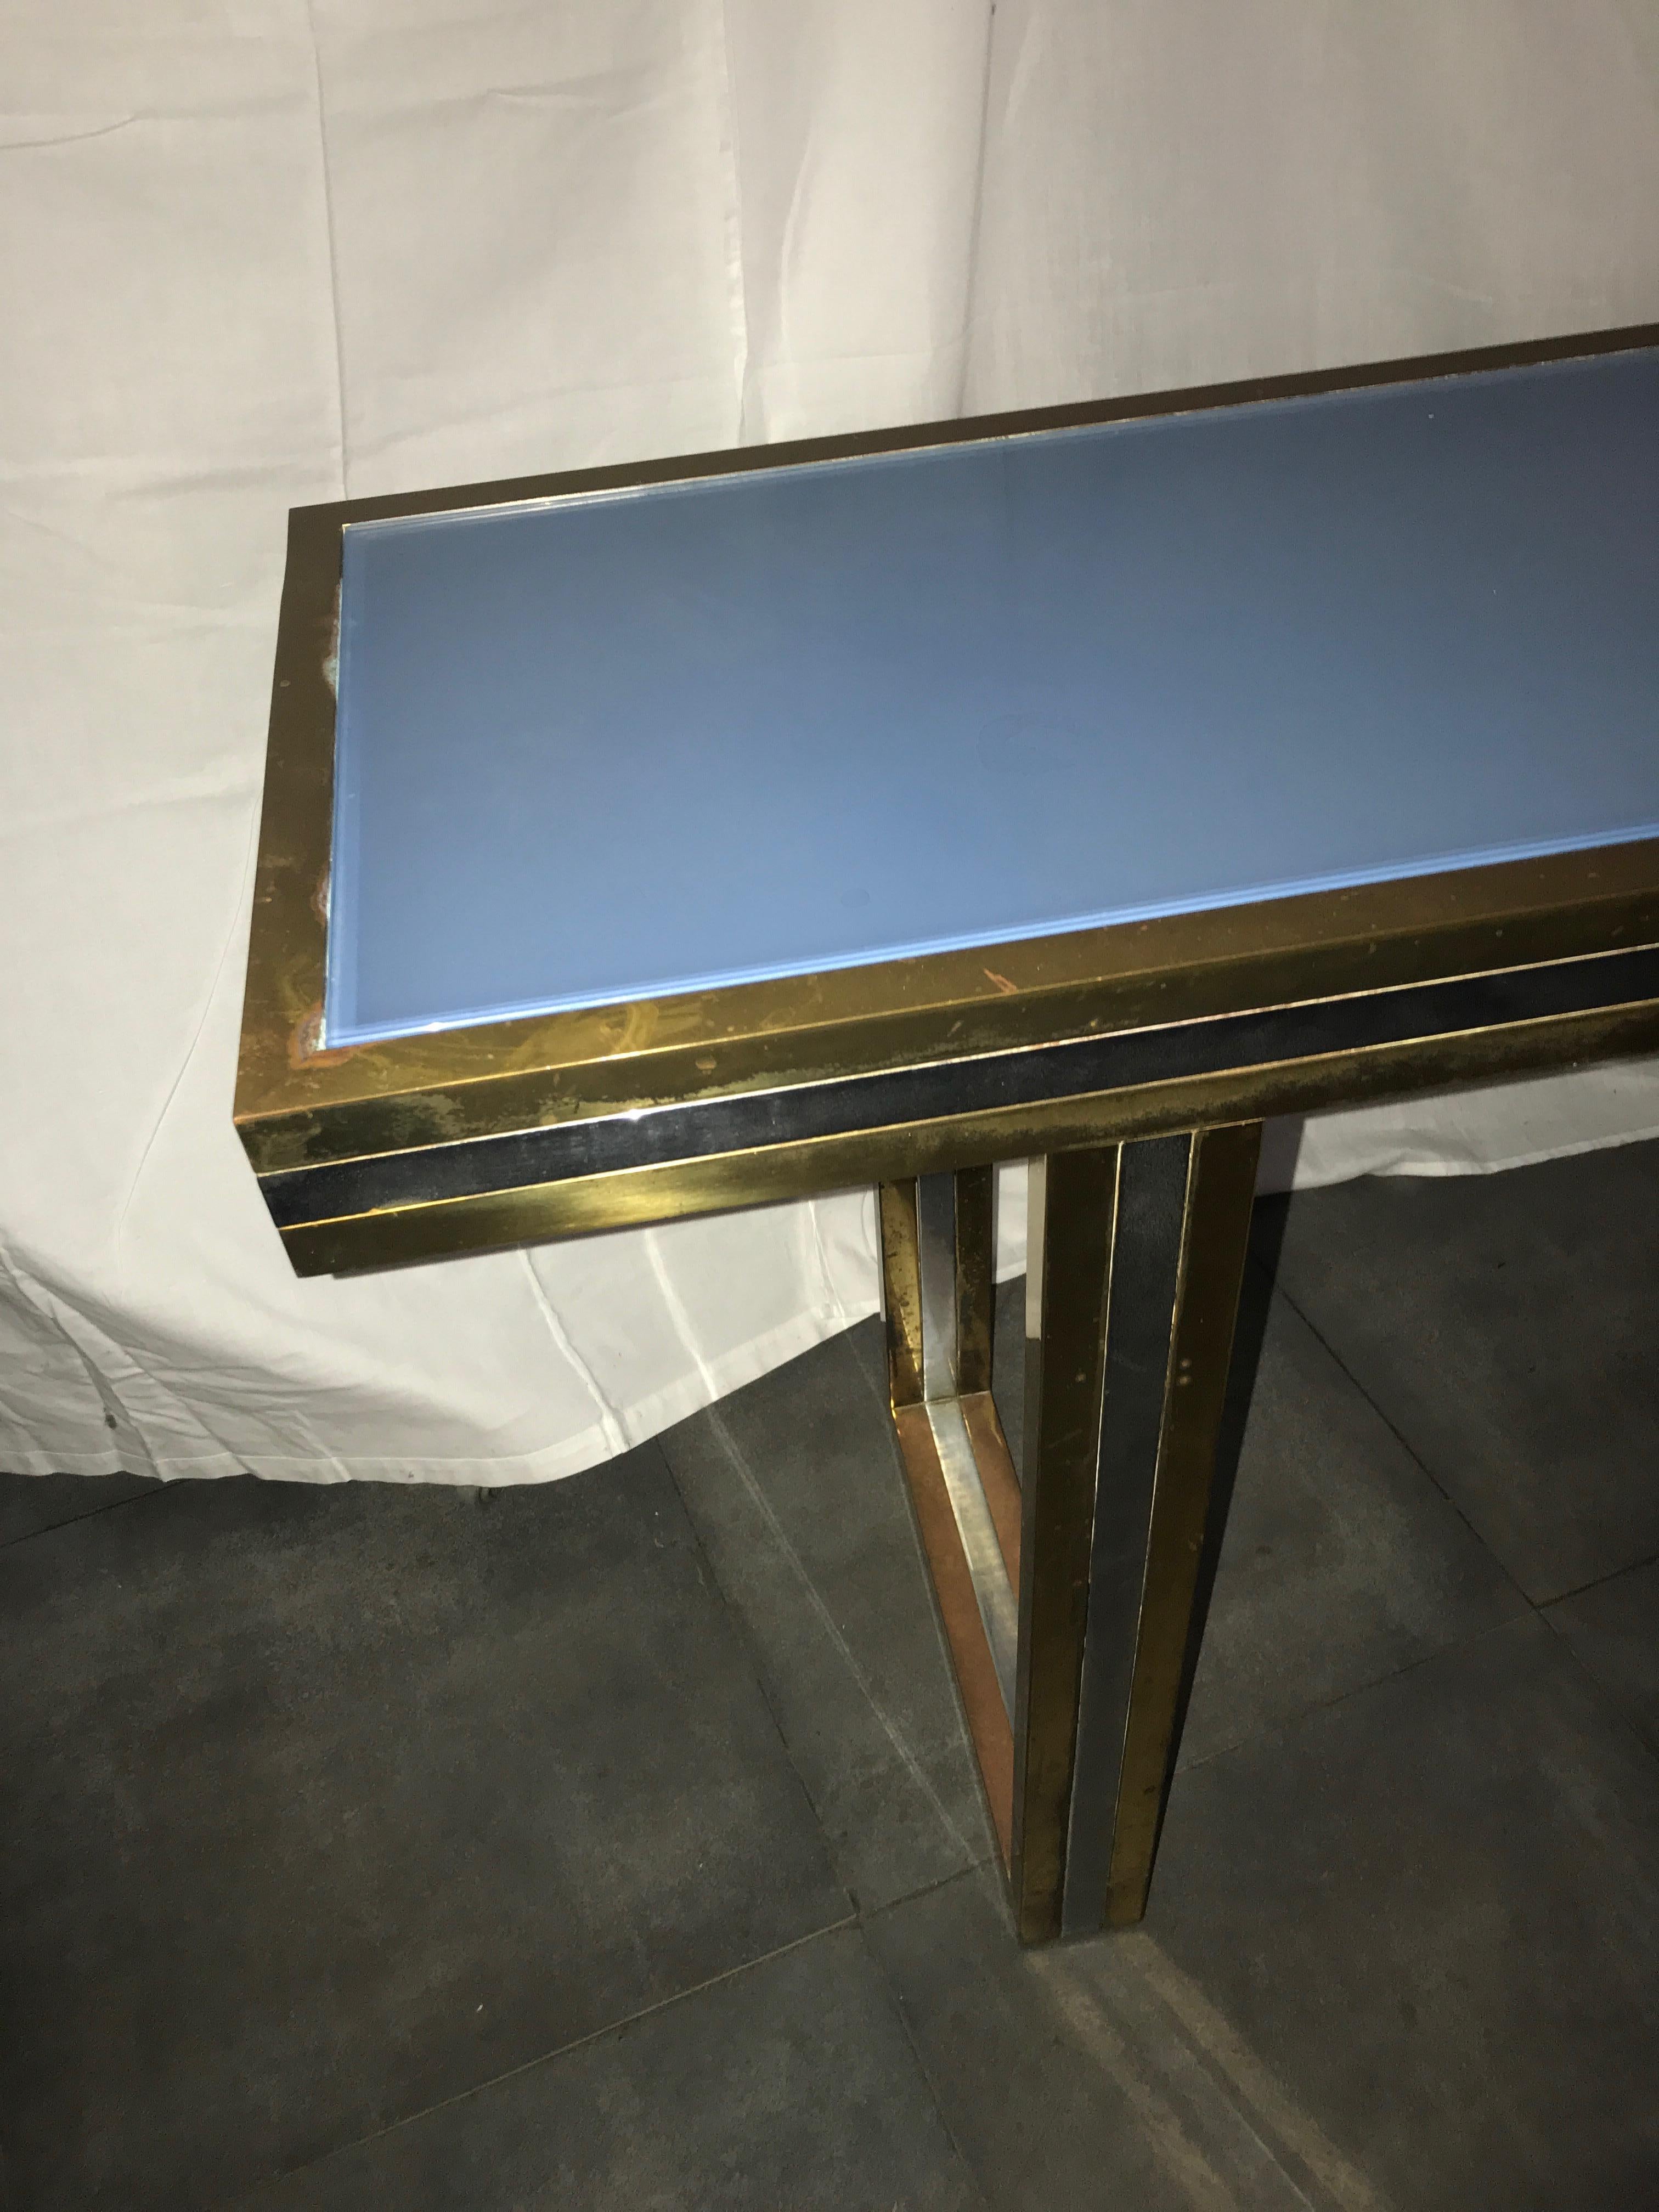 Maison Jansen Large Brass and Chrome Metal Console, Blue Glass Top, French, 1970 For Sale 5